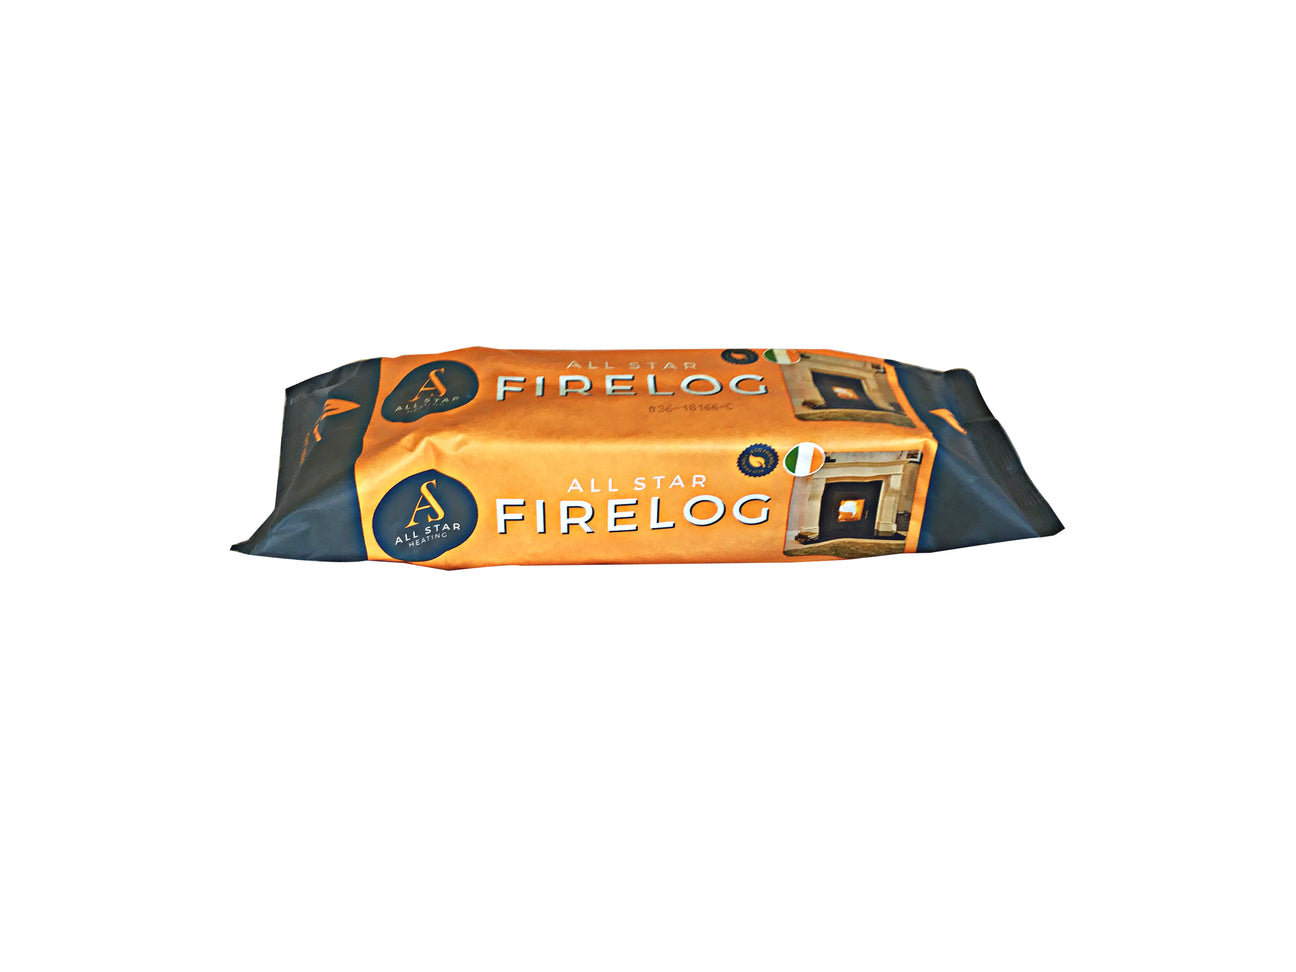 Image of All Star Fire log in its paper wrapper